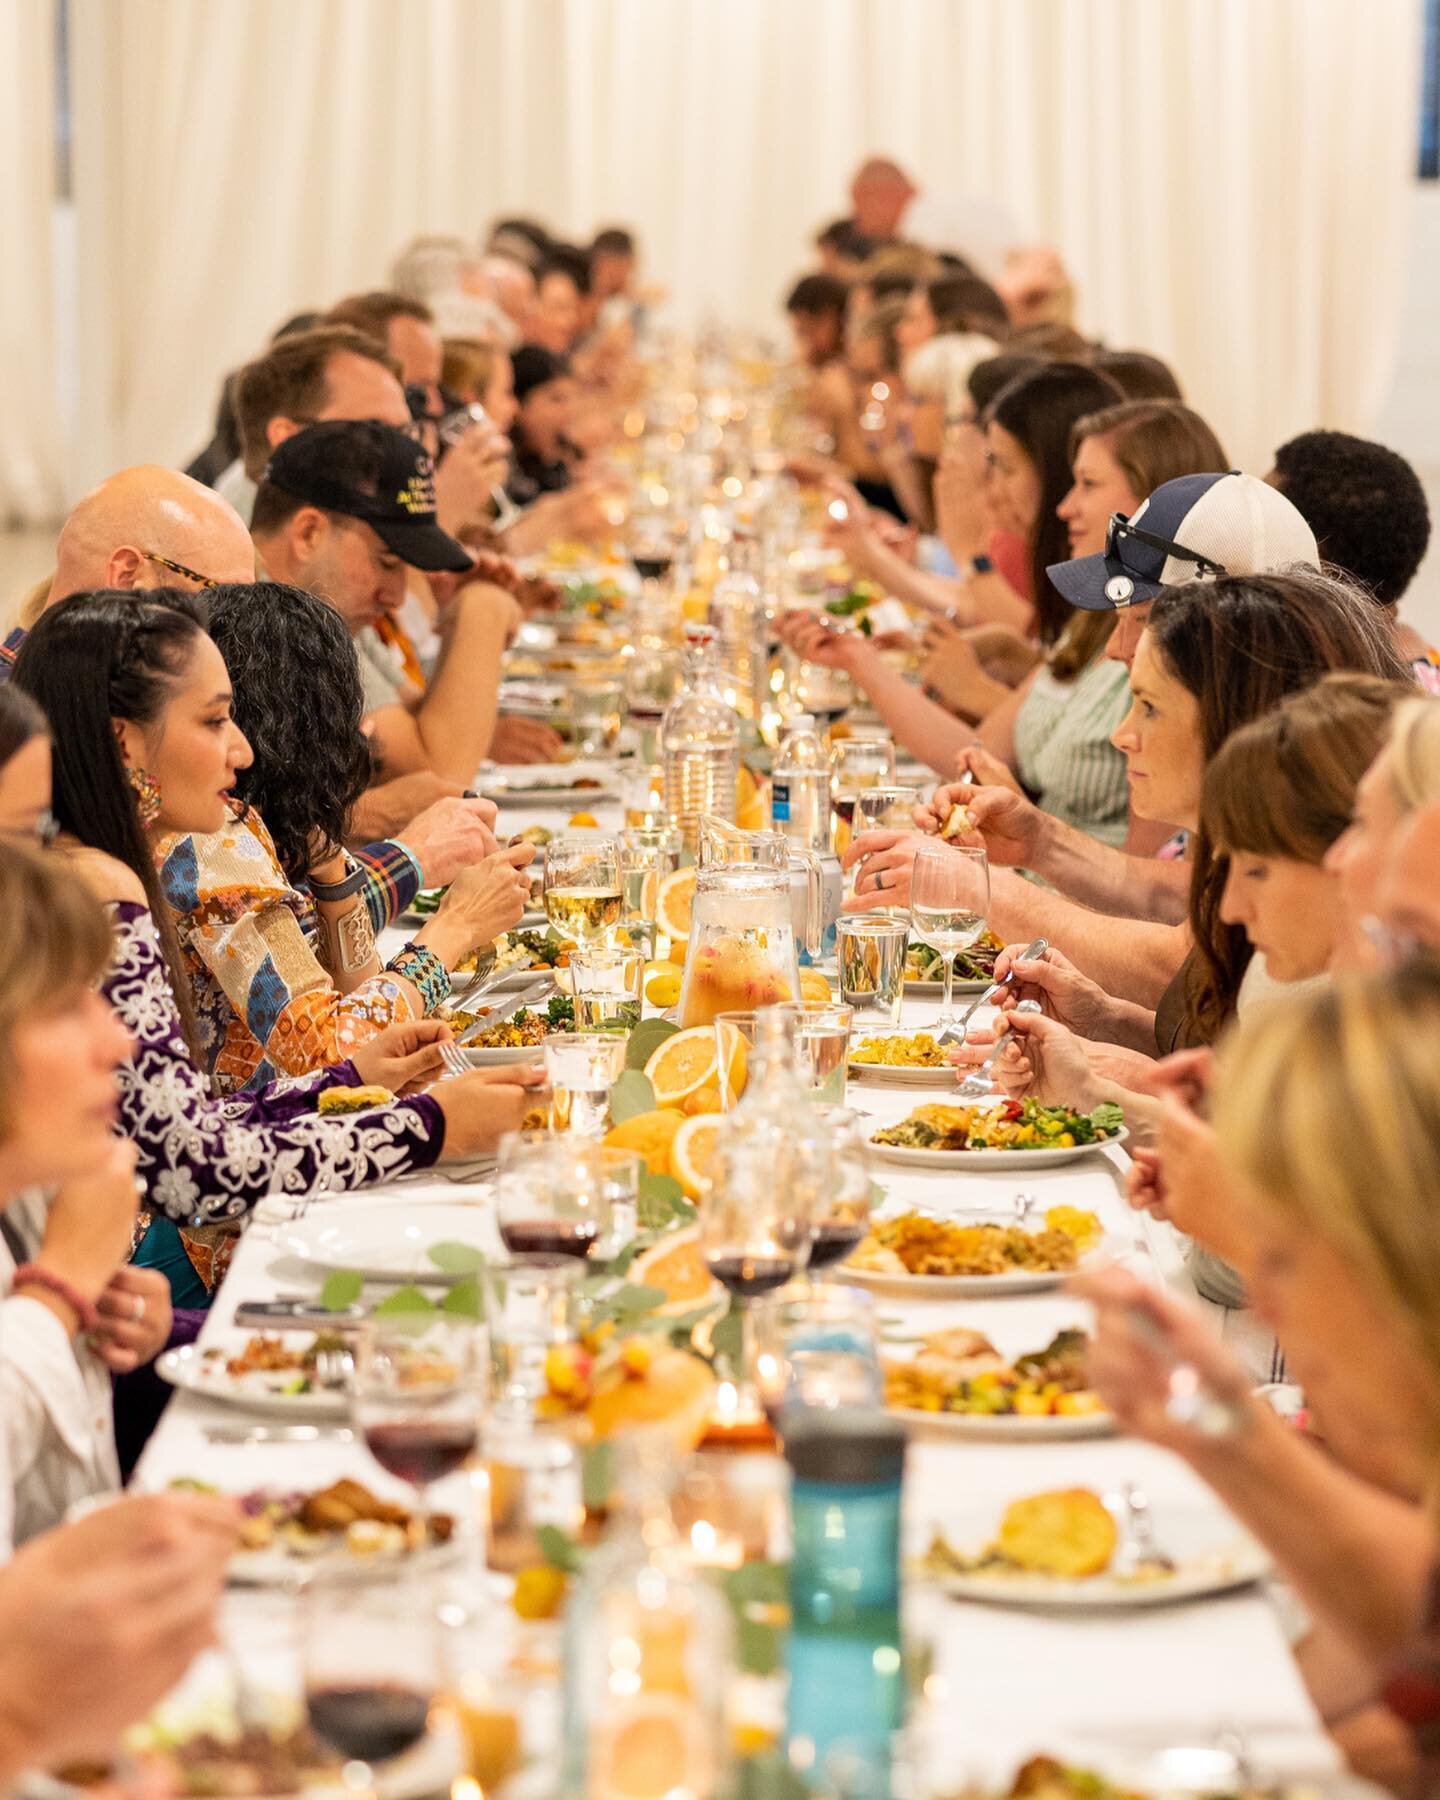 Unified through one table 🍽️

When we sit around a table, something extraordinary happens. The aroma of delicious food tantalizes our senses, and as we break bread together, we also break down walls that separate us. We engage in conversations that 